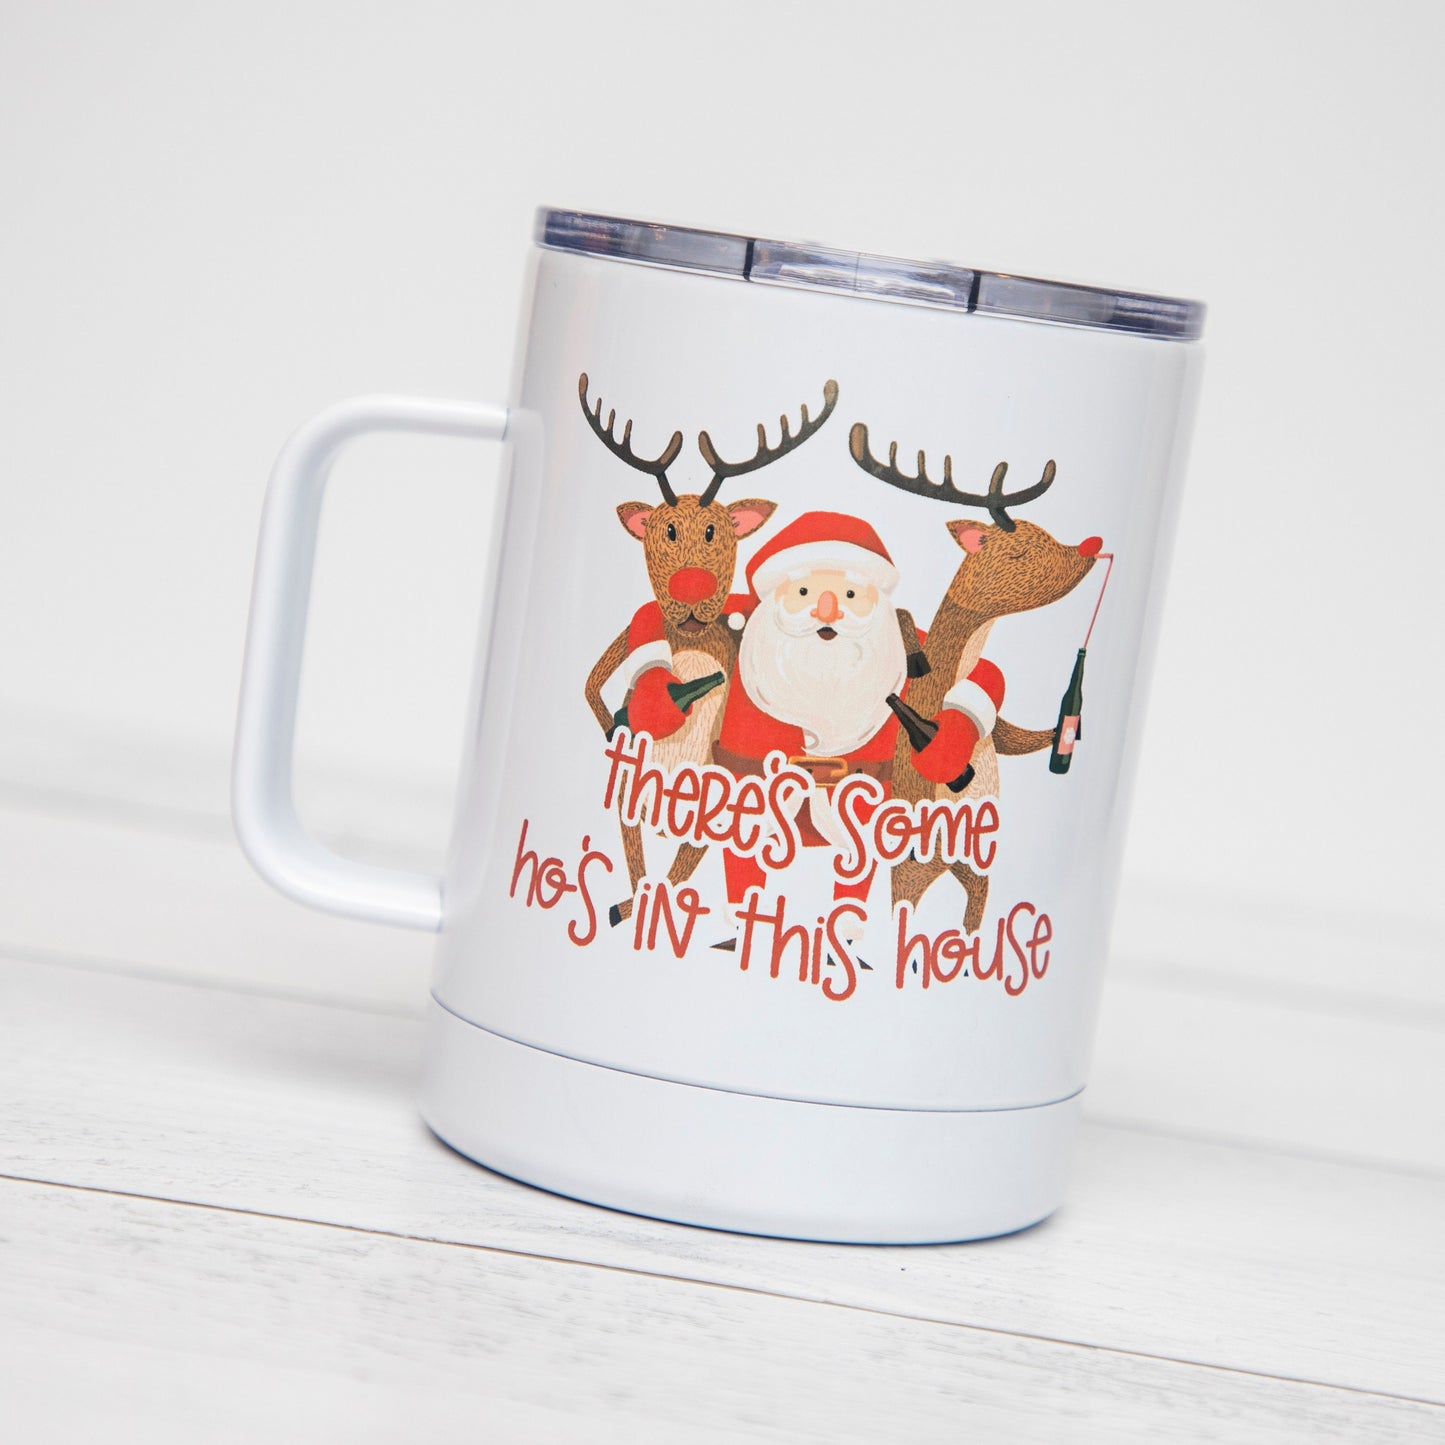 There's Some Ho's in This House Insulated Camp Mug